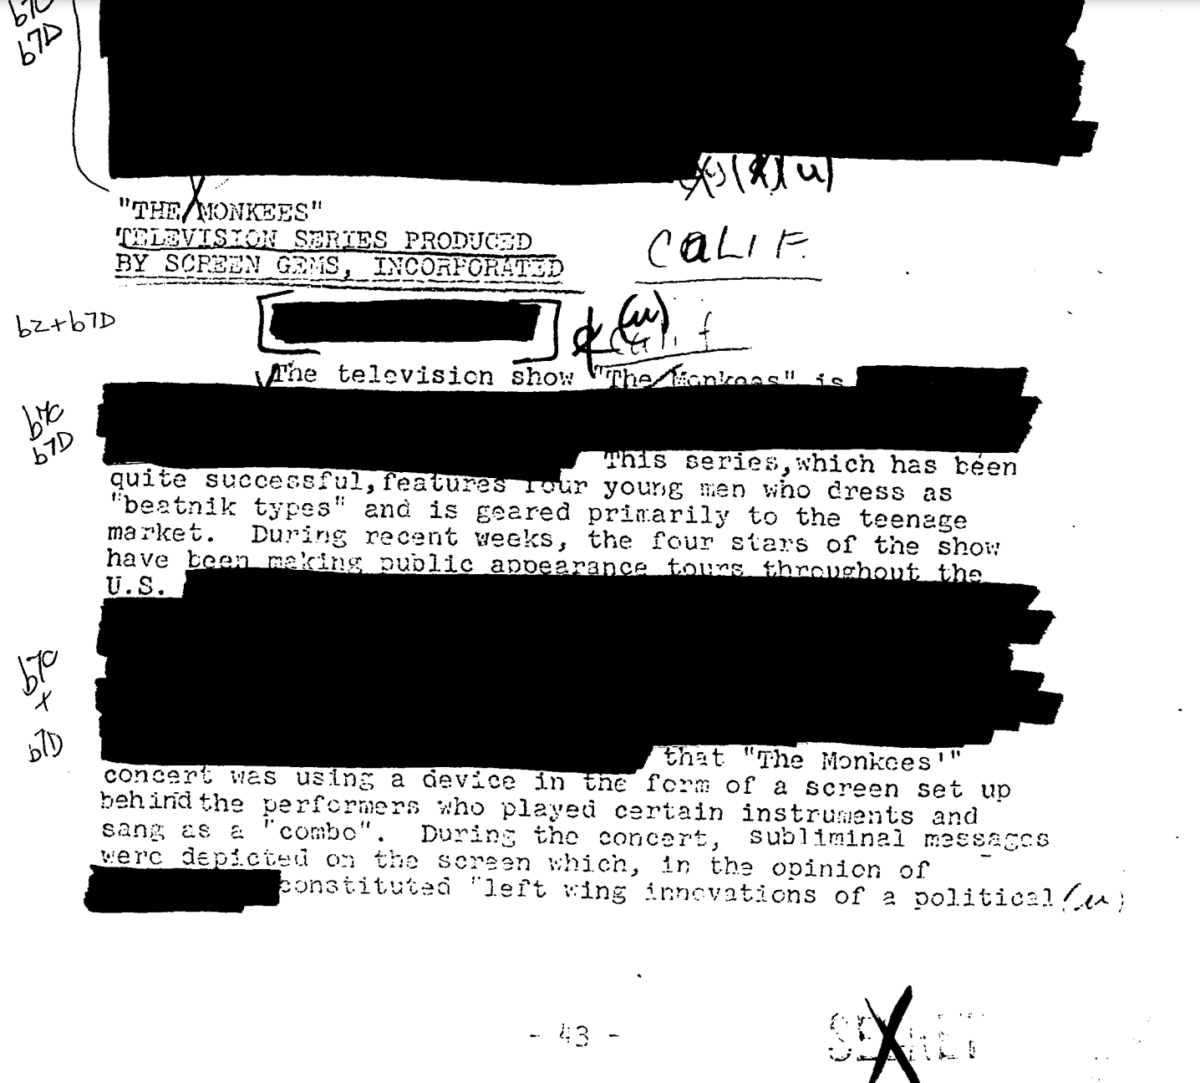 A portion of the FBI's highly-redacted file on The Monkees